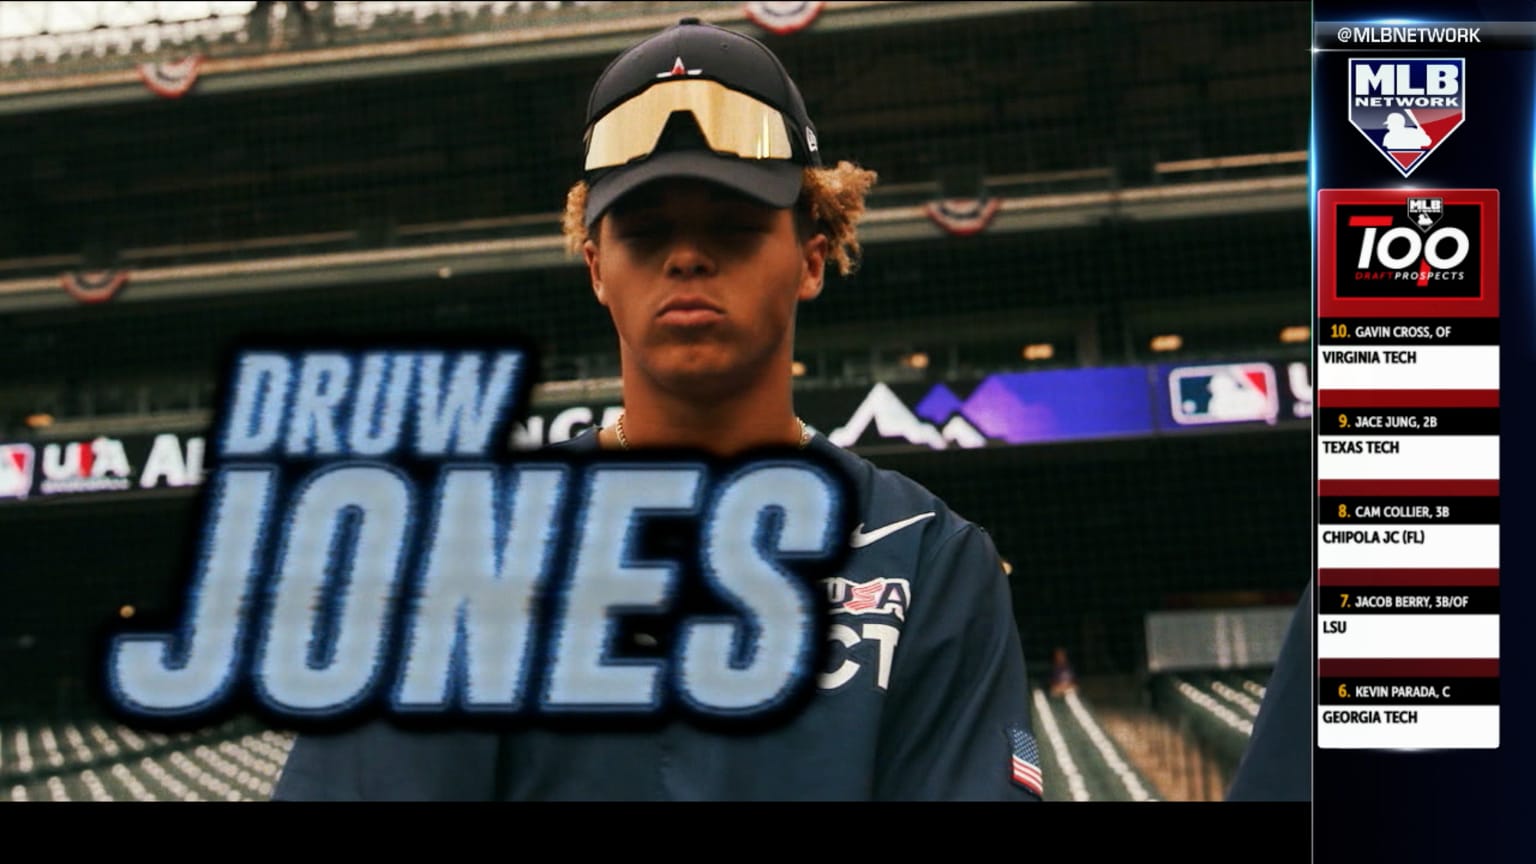 Druw Jones - #1 2022 MLB Draft Prospect, Druw Jones grabs the top spot on  our countdown of the top 💯 MLB Draft prospects!, By MLB Network